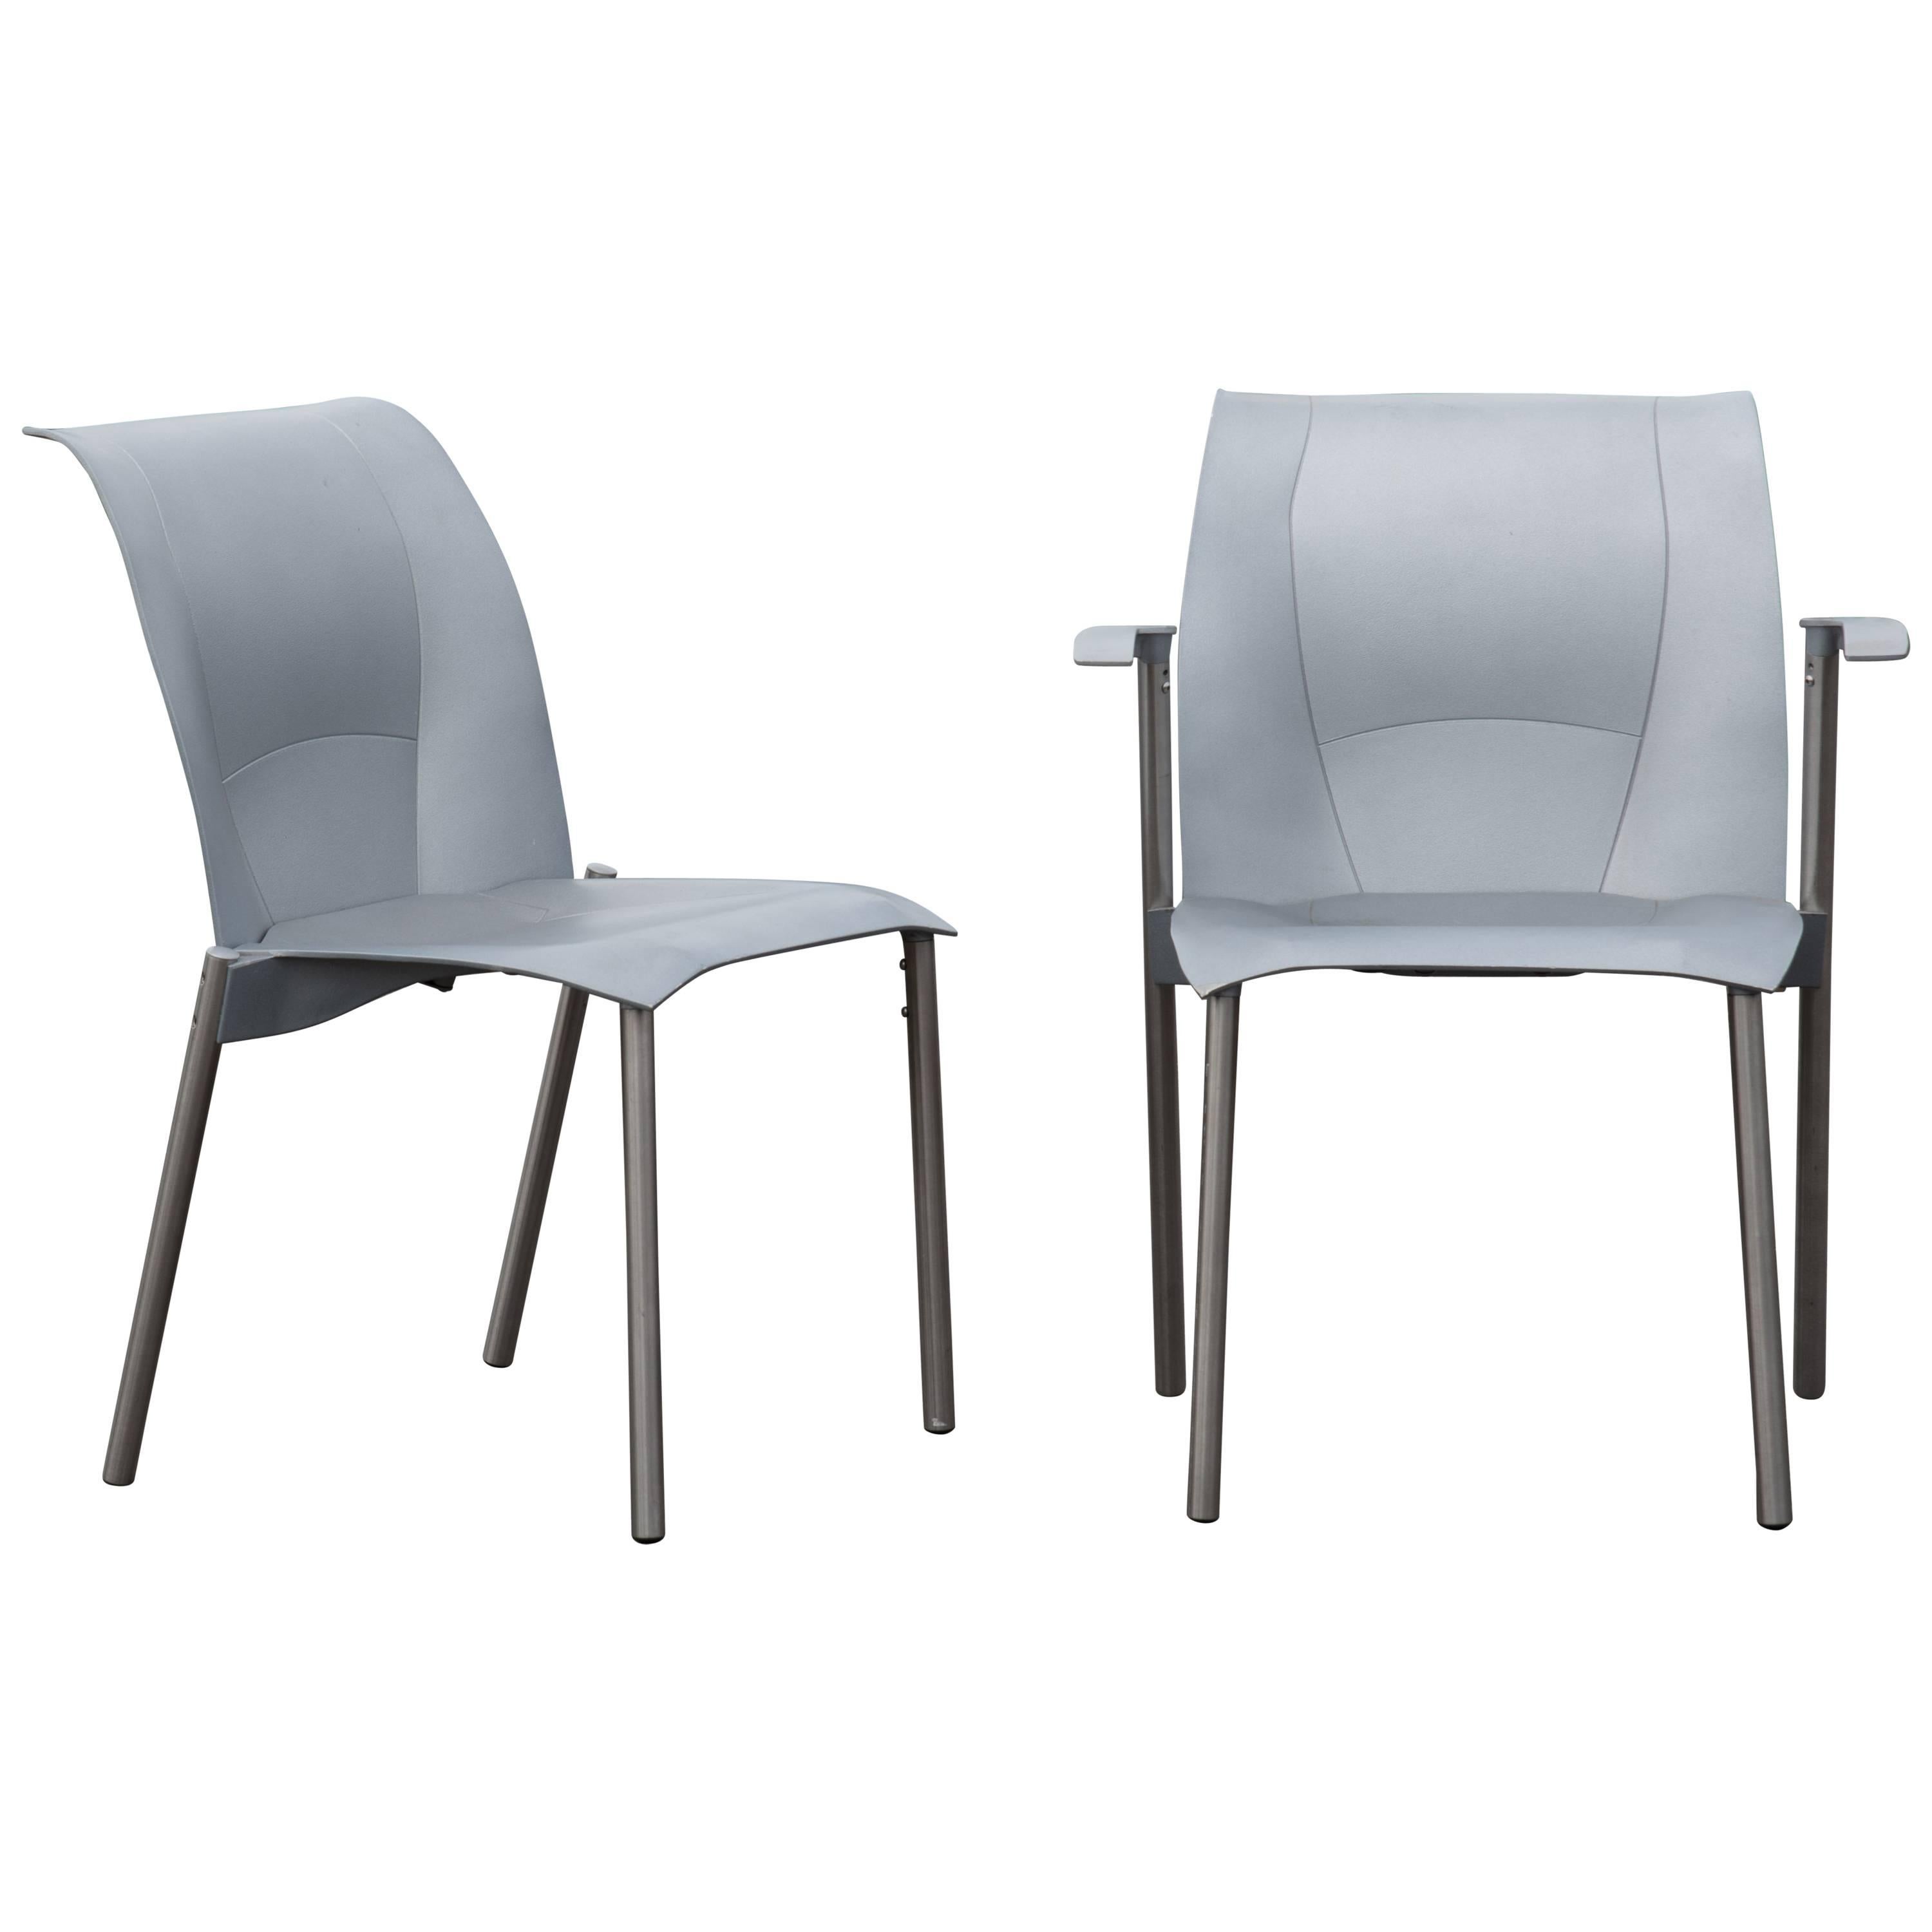 Two Frank Gehry for Knoll Studio Fog Chairs